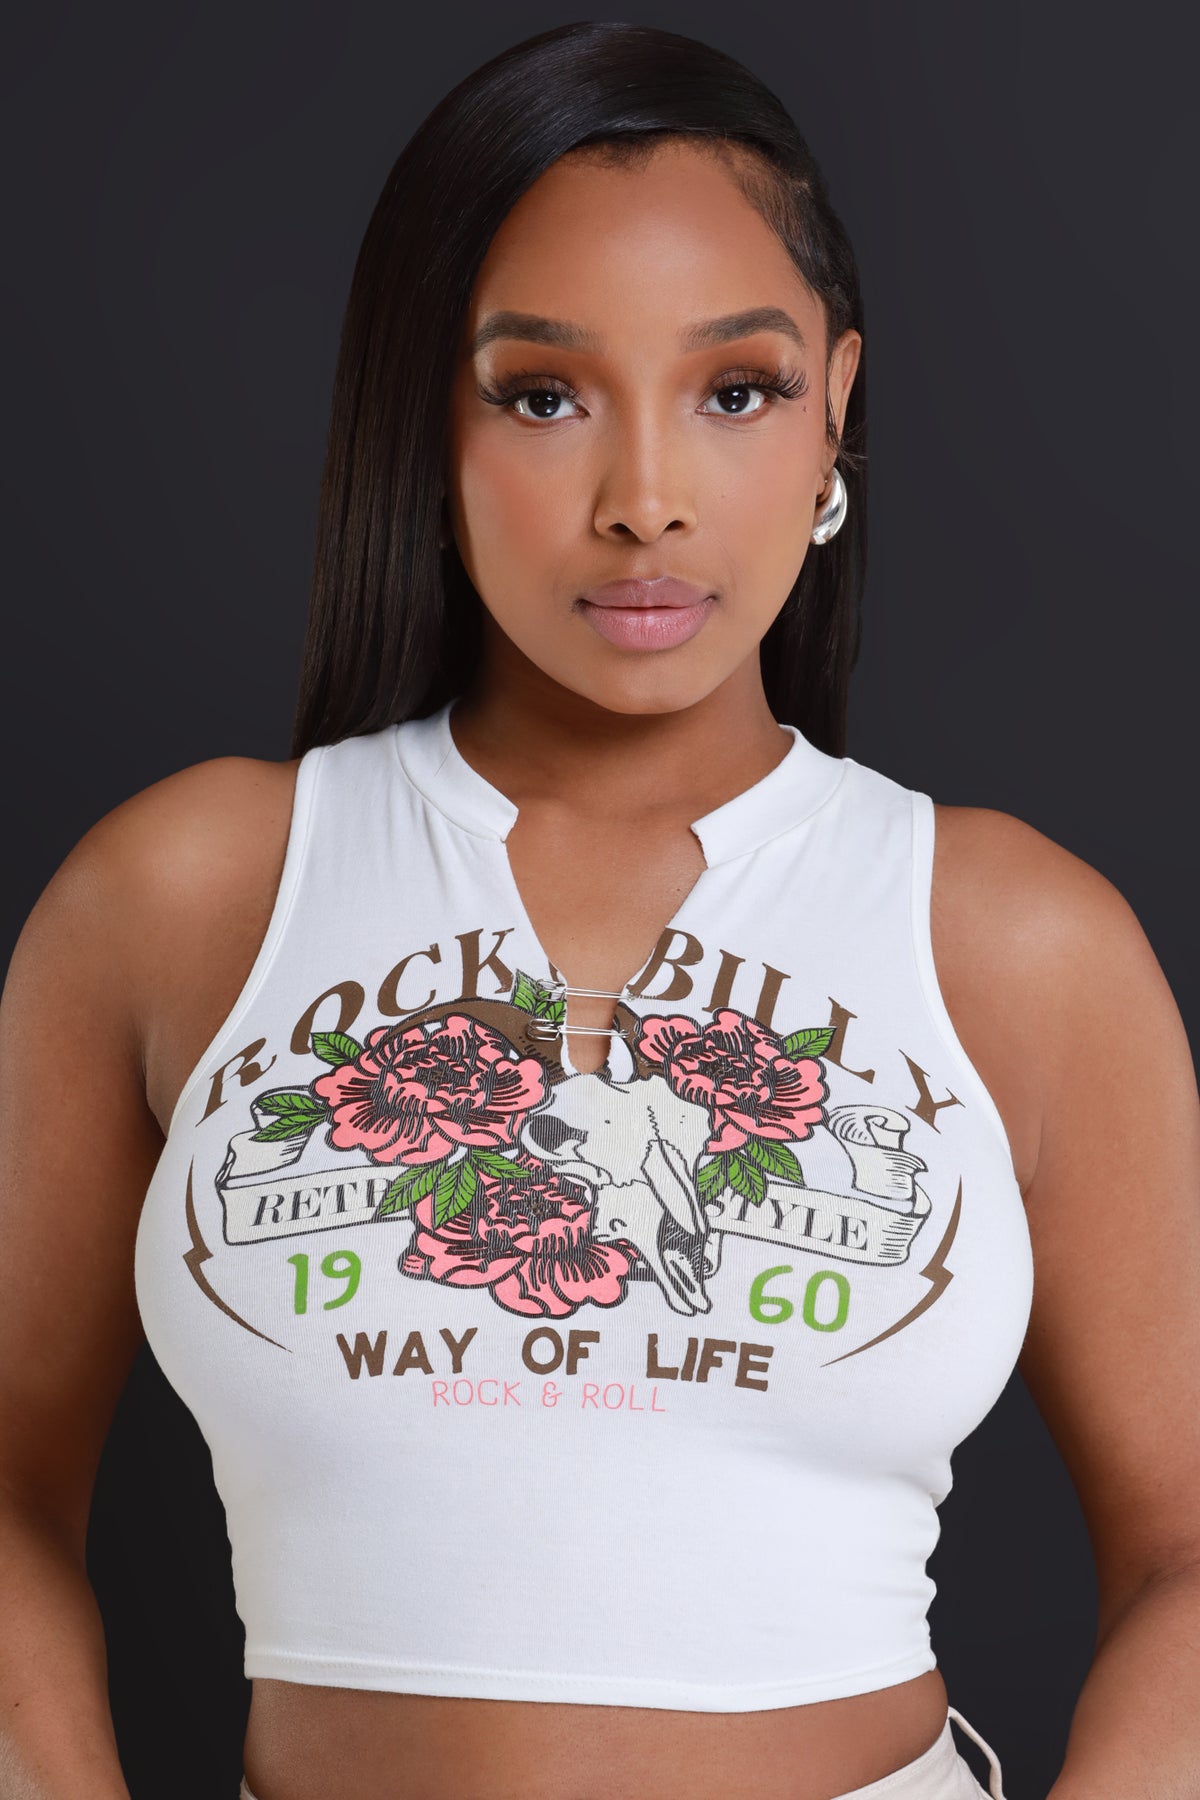 
              Way Of Life Graphic Crop Top - White - Swank A Posh
            